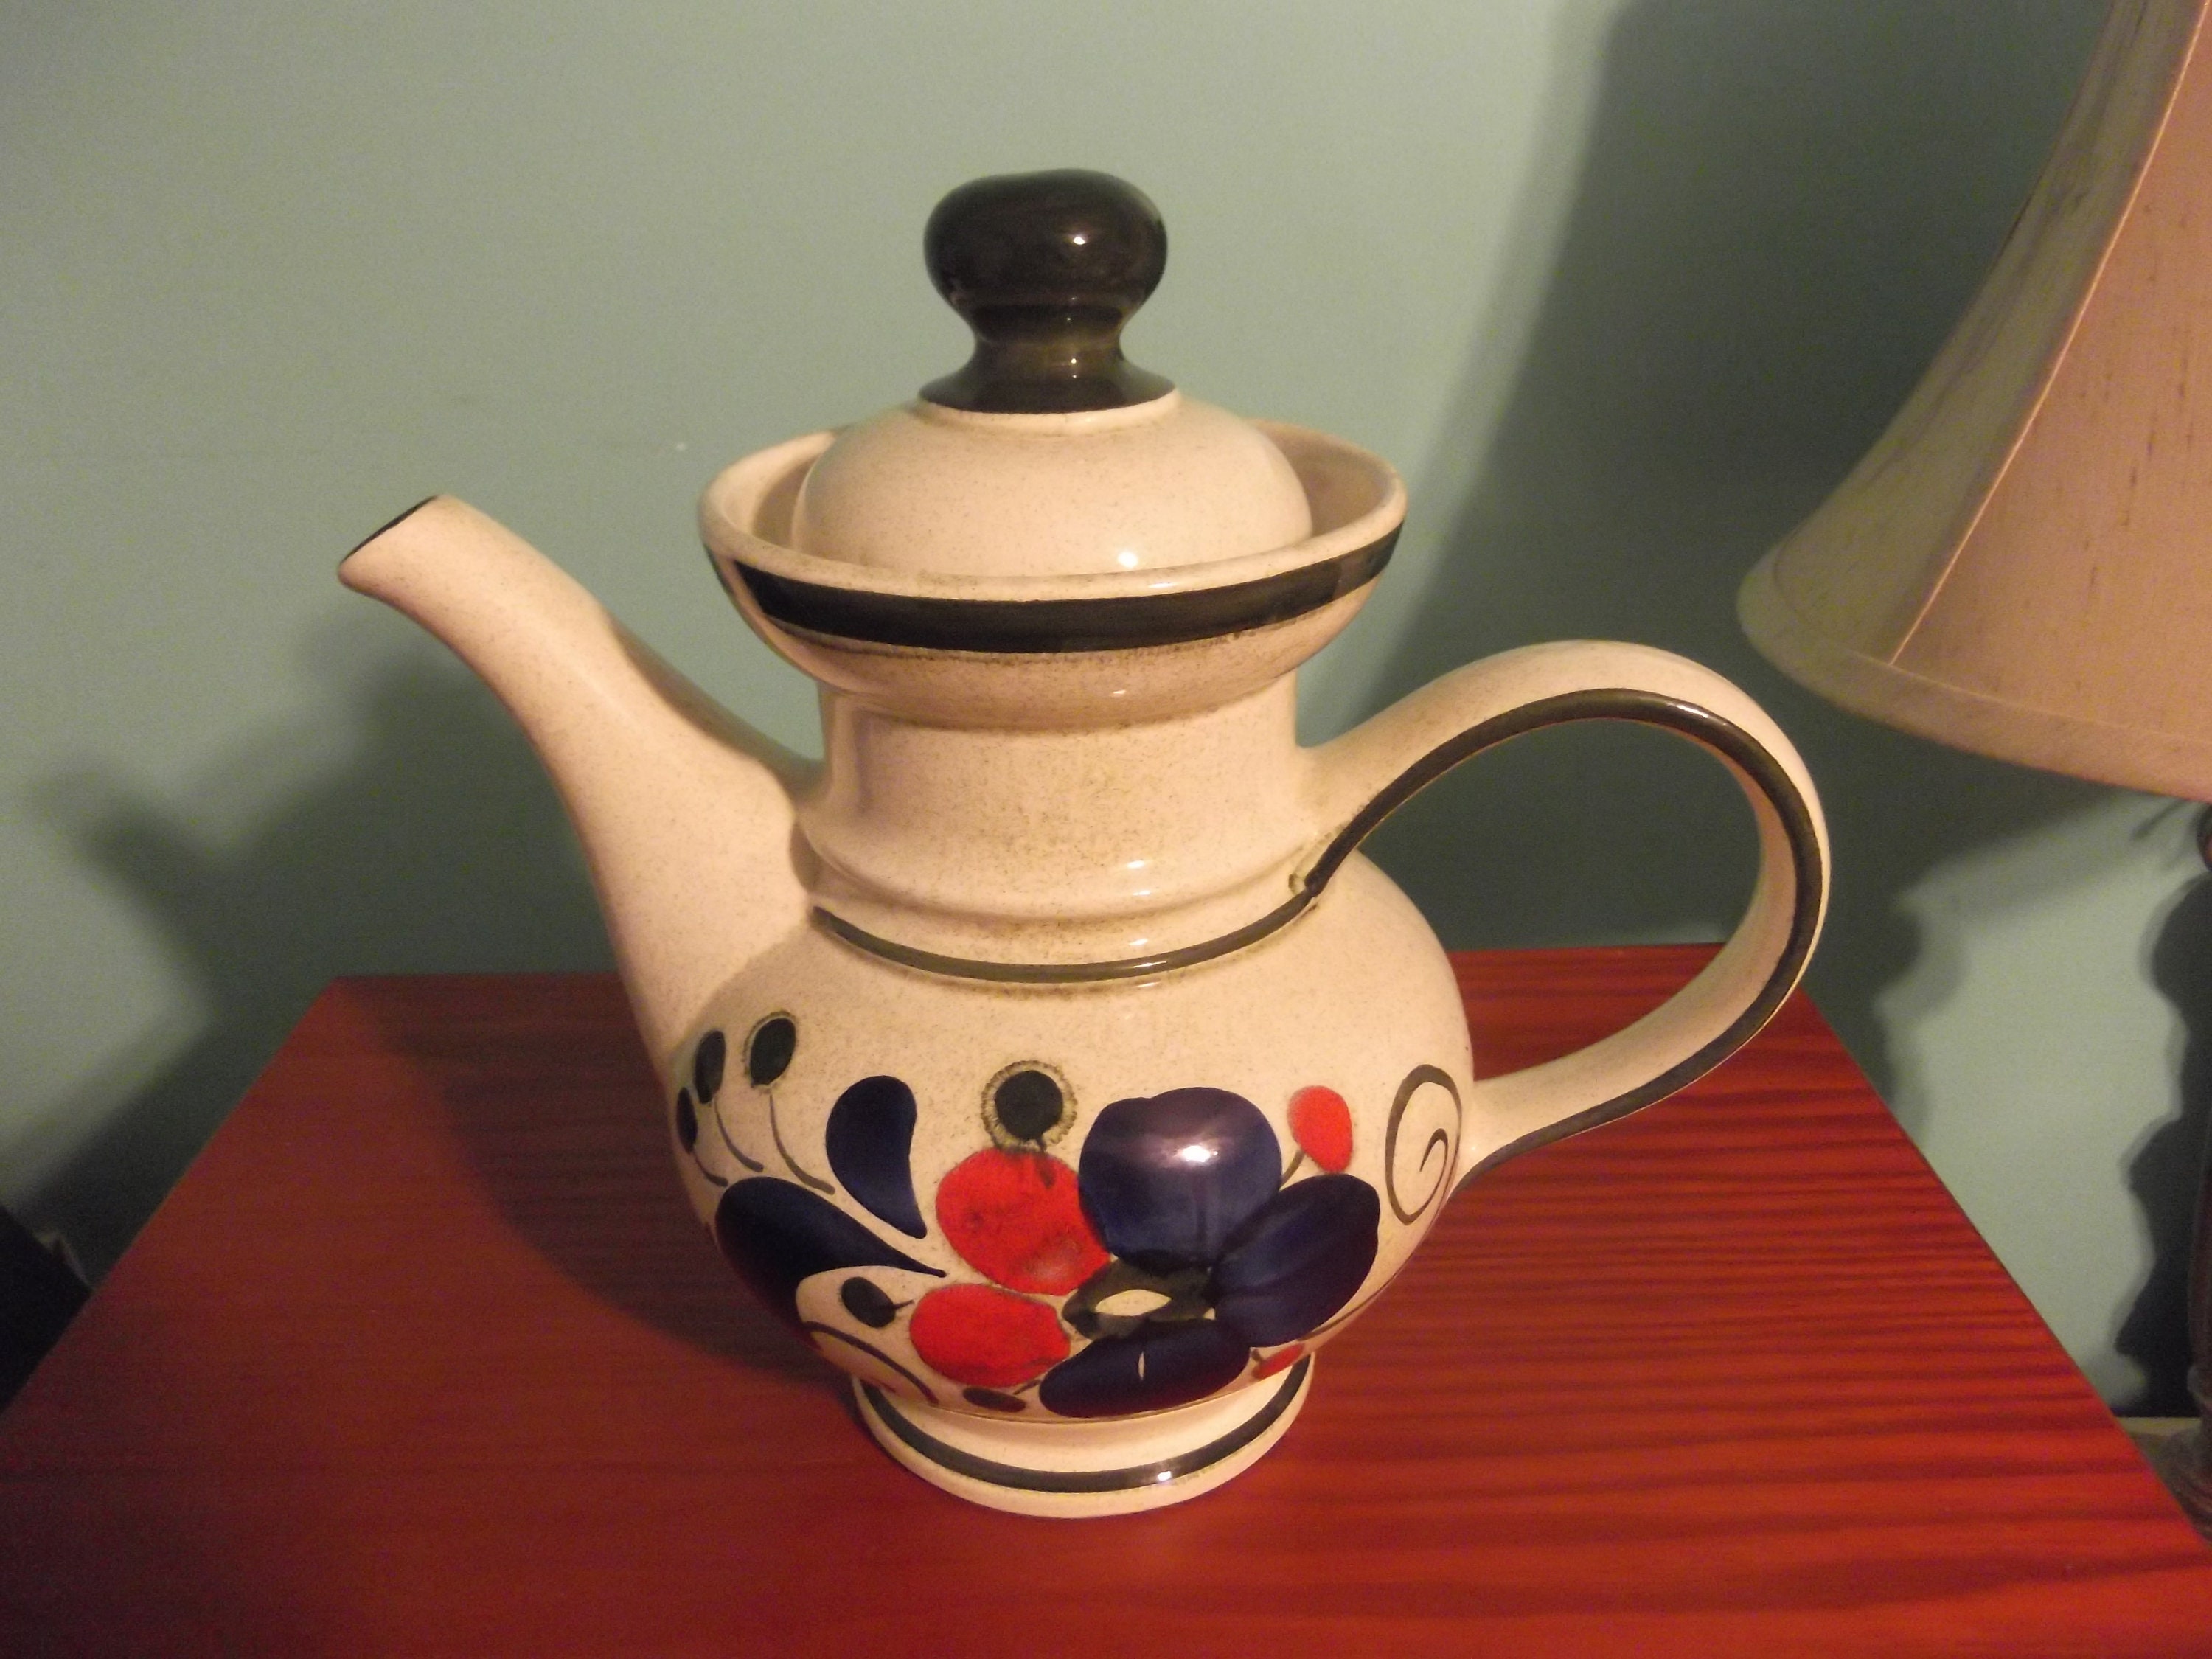 Whimsical Ceramic Teapot Postmodern Design by Walchtersbach, Germany